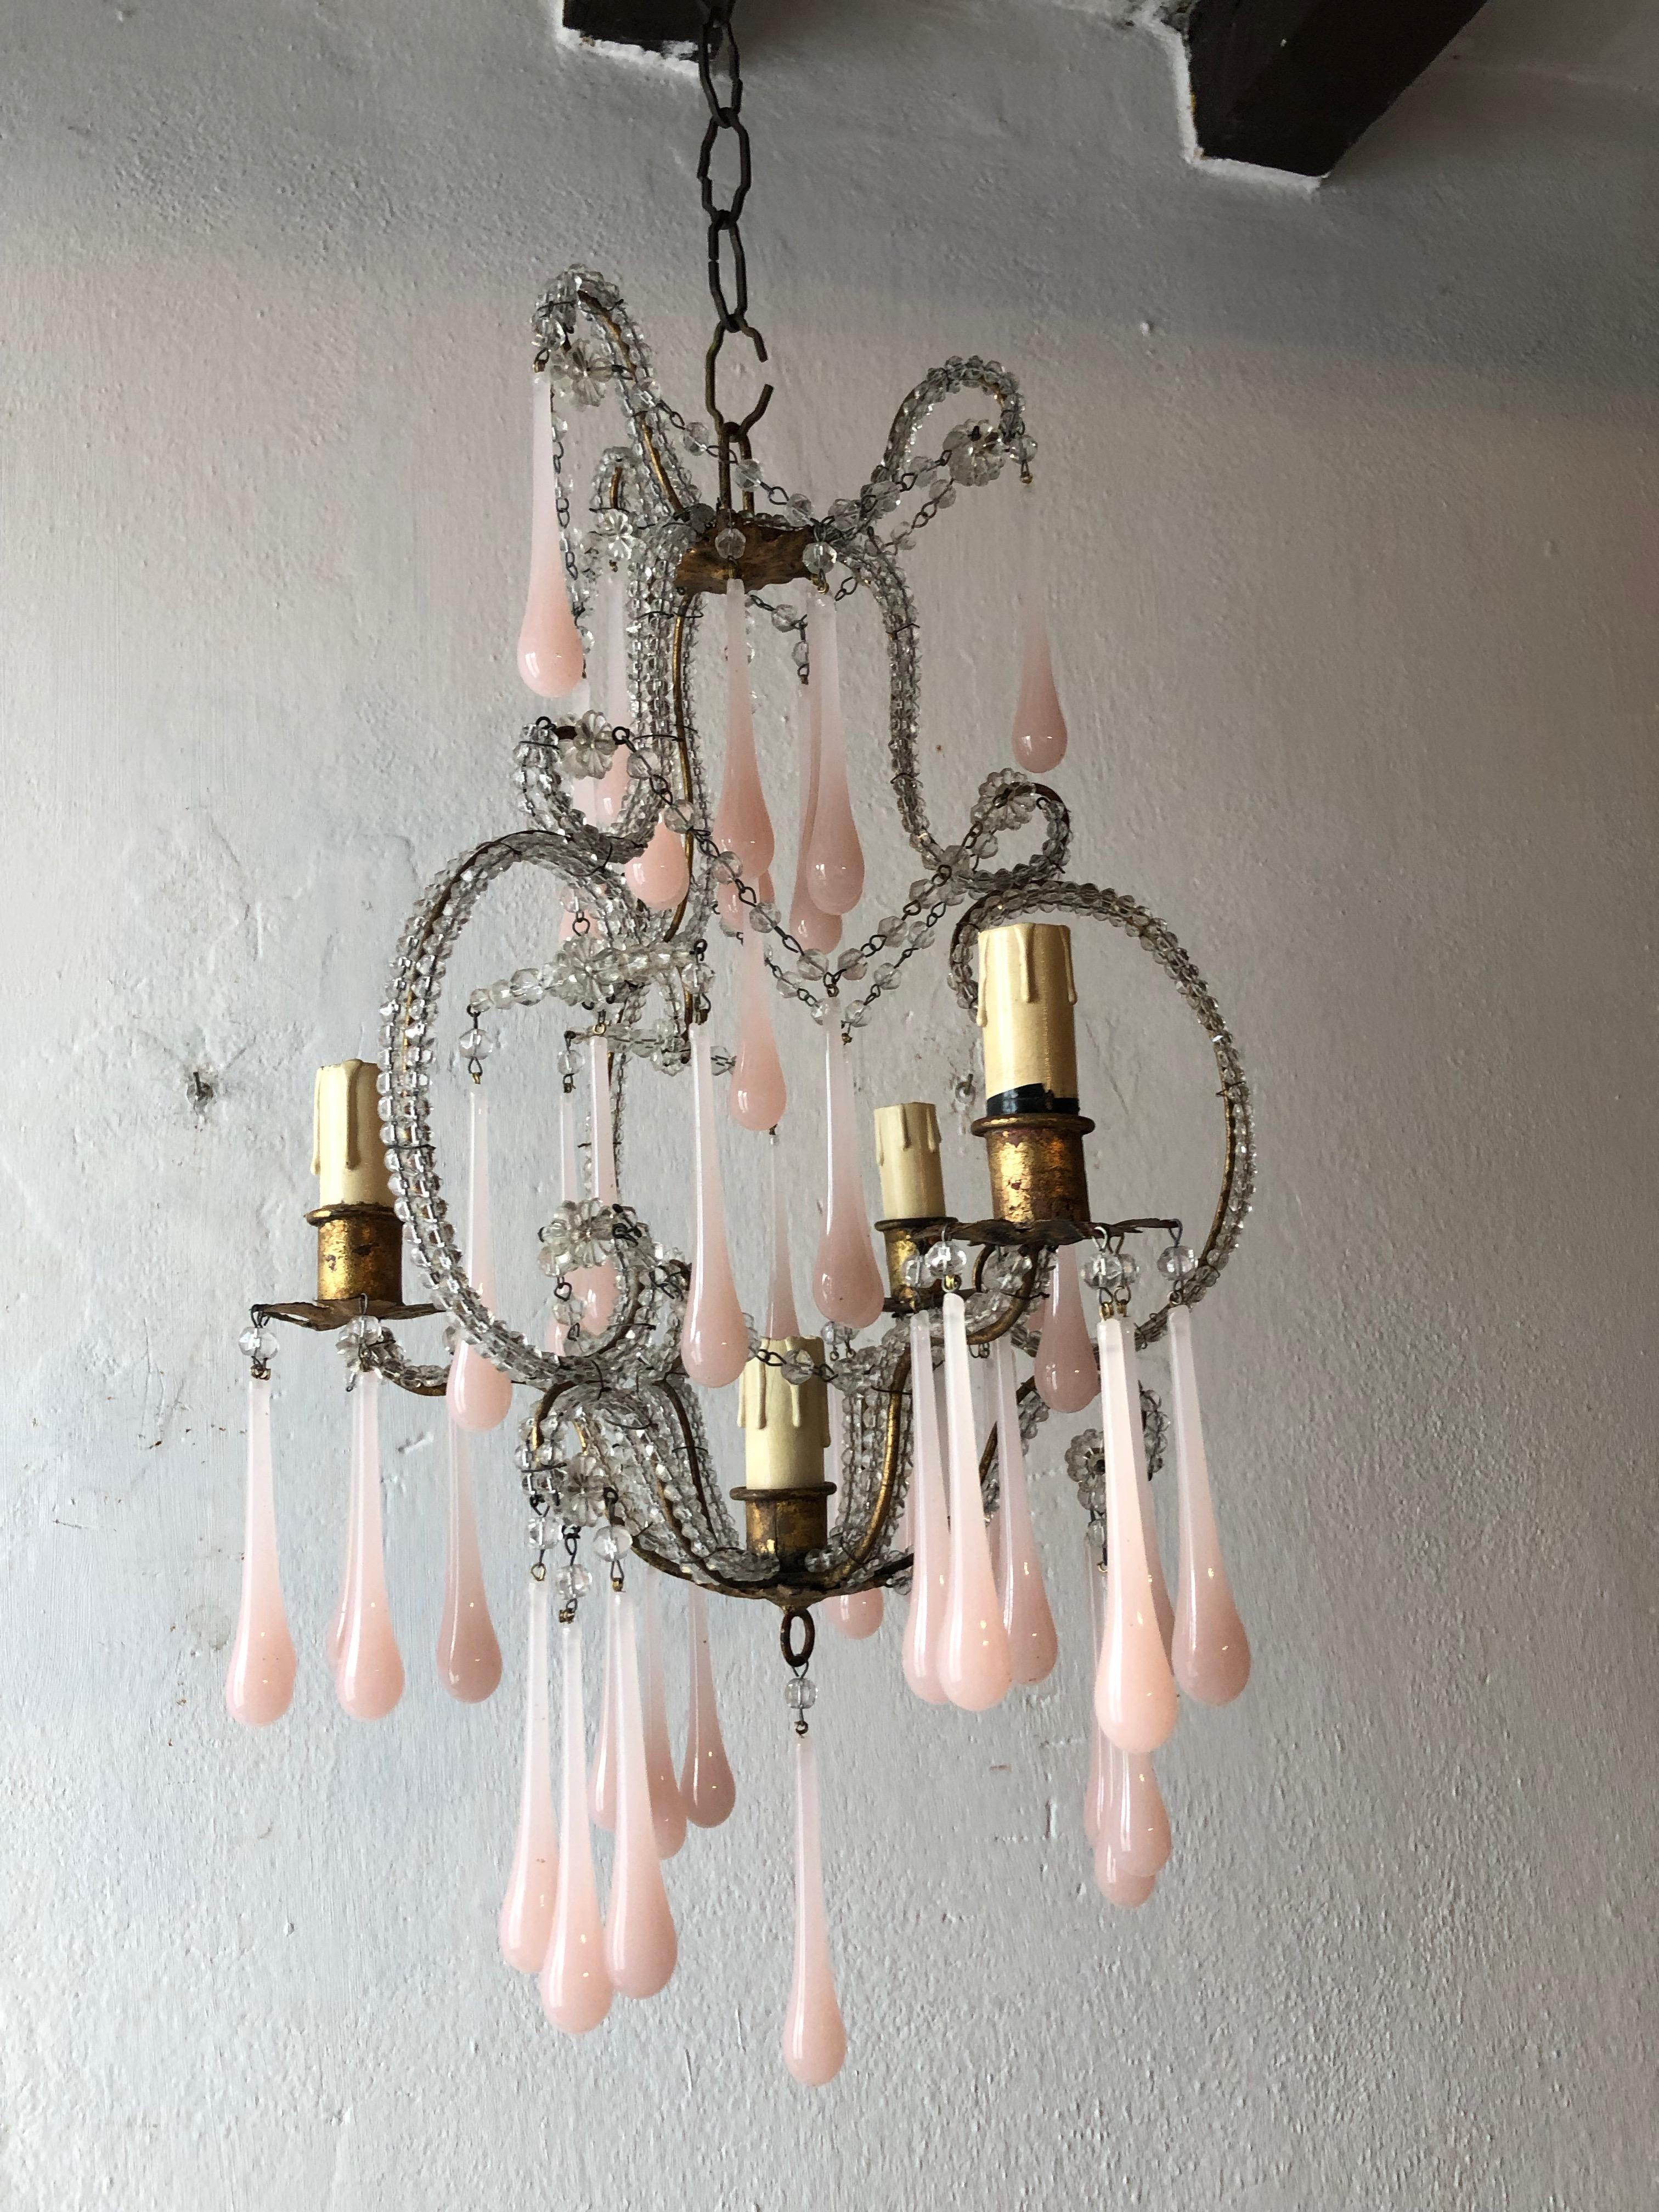 Rewired and ready to hang. Housing 4-lights. Swags of macaroni beads and florets throughout. Double beaded body with nearly 50 pink opaline Murano drops. Free priority shipping from Italy.